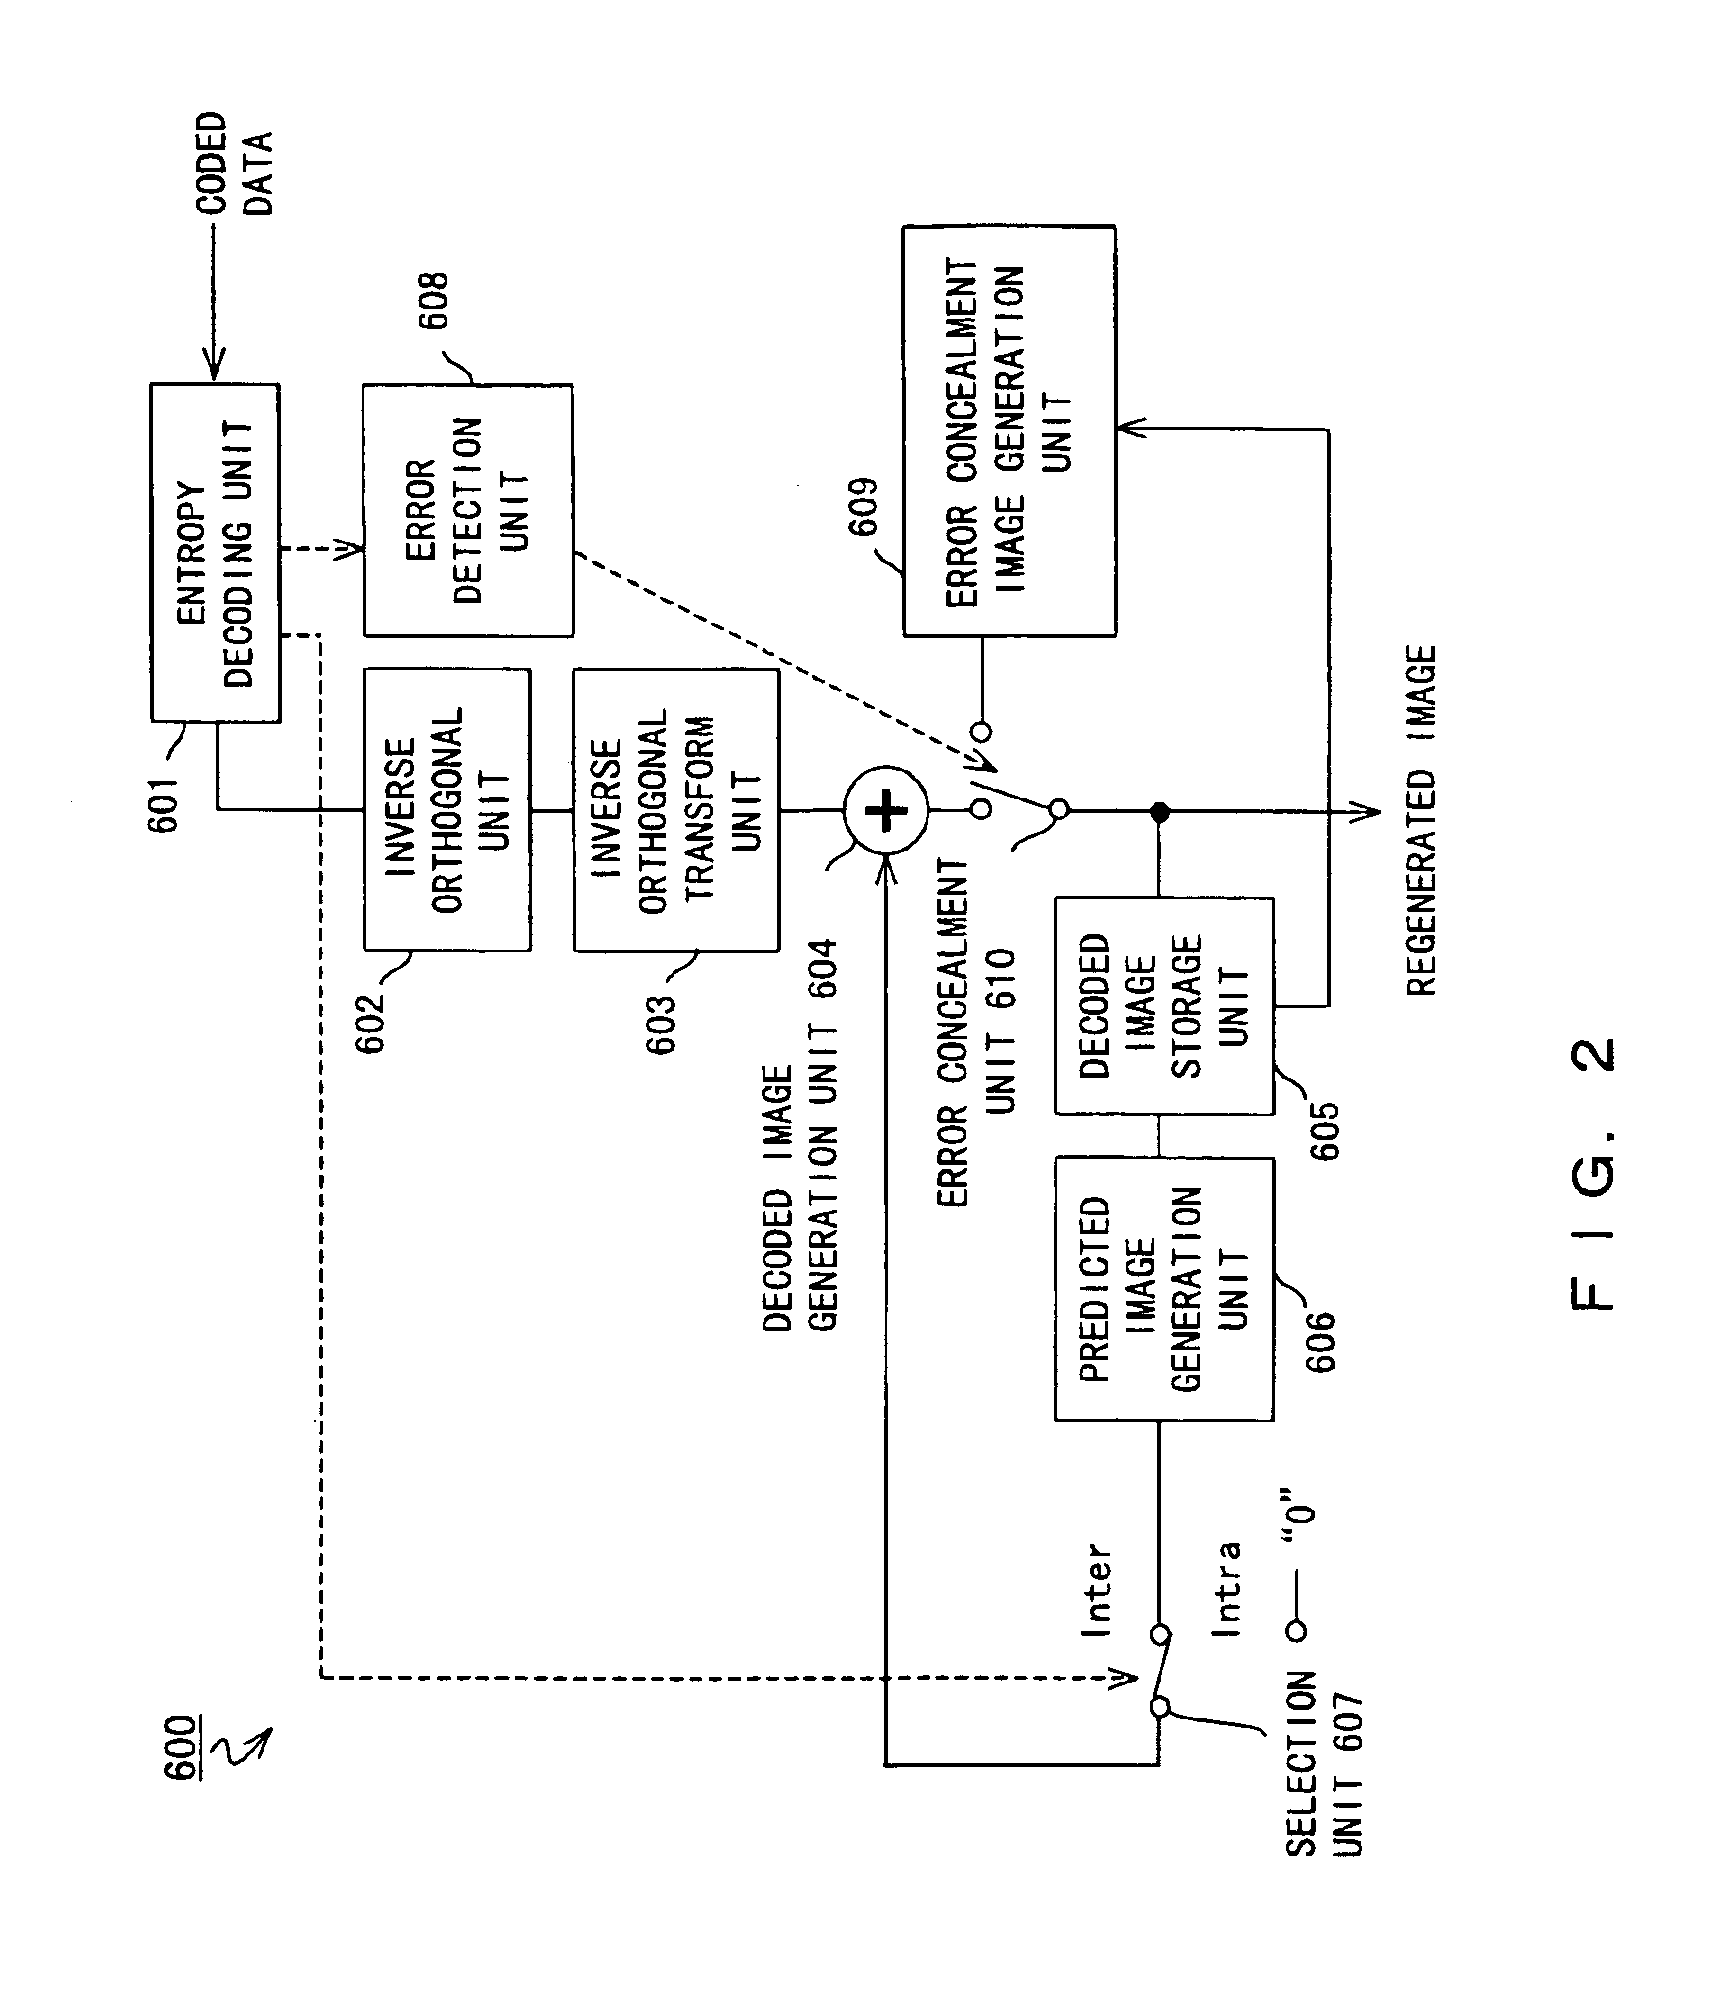 Encoder and decoder for moving picture